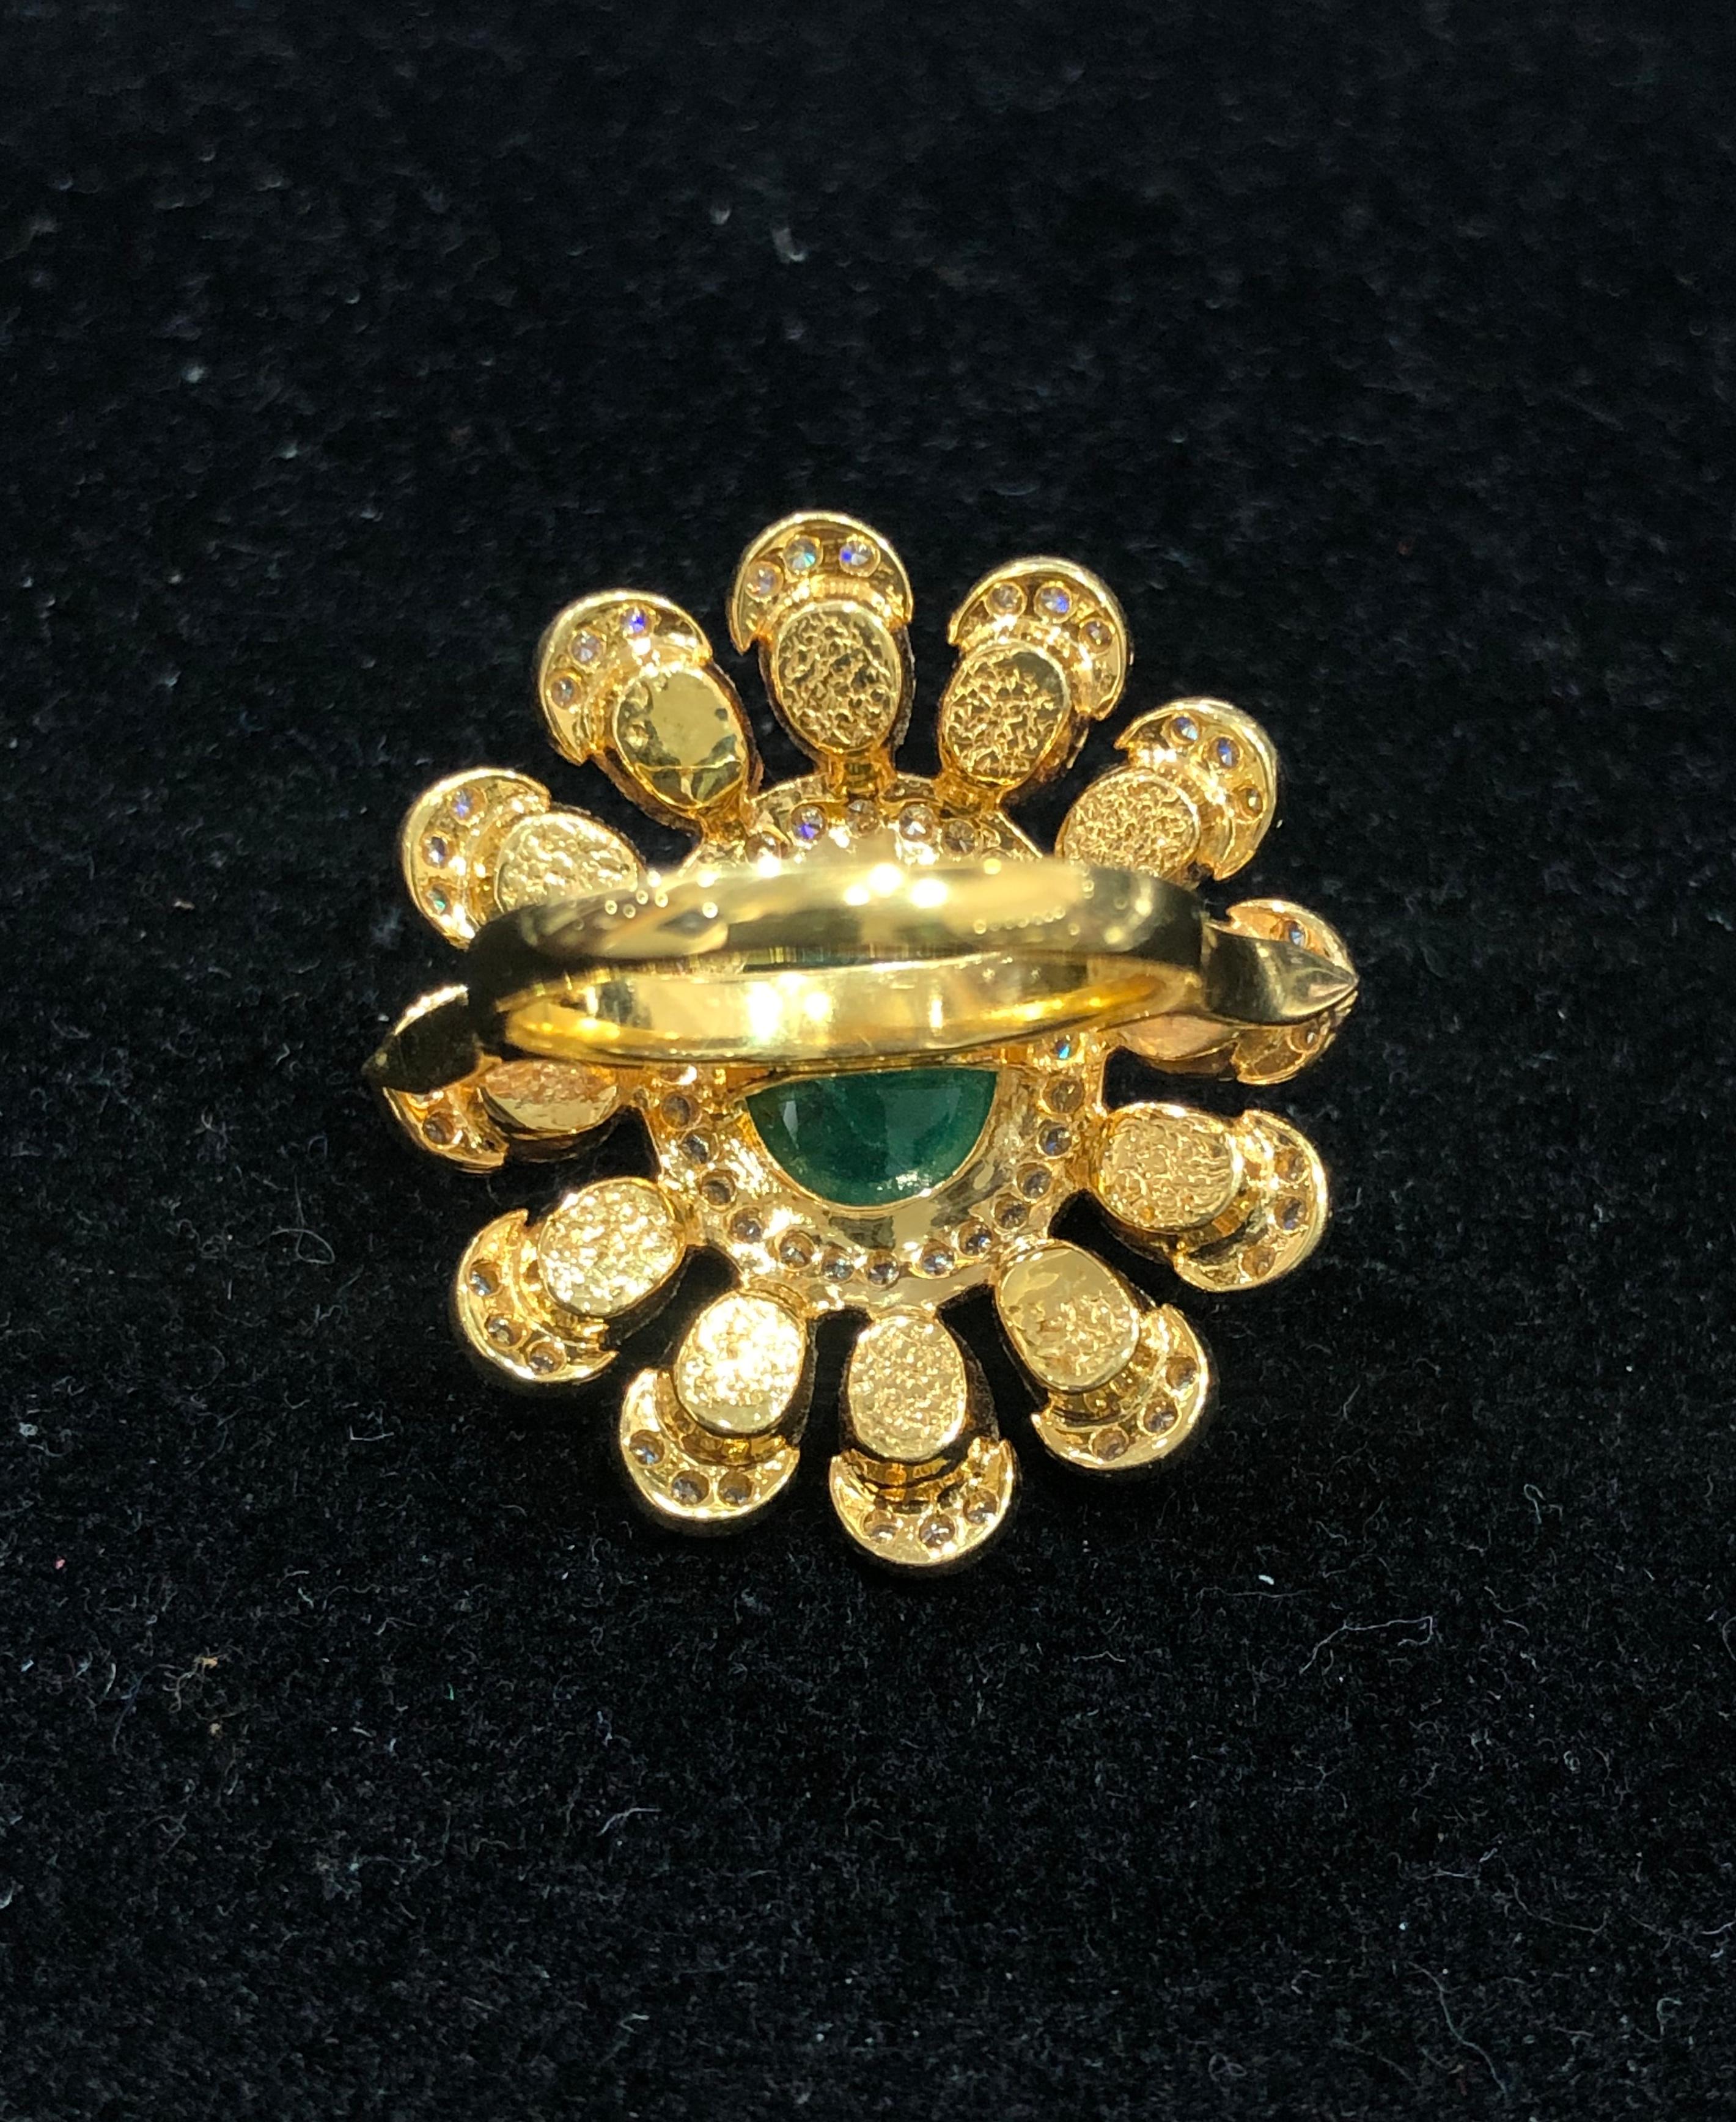 Diamond: 2.28 carat
Emerald: 7.89 carat
18kt Gold: 15.335 grams
Ref No: DR-ECA

A ring is a halo on your finger. Let the wide range of beautifully handcrafted ring enhance your graceful fingers.